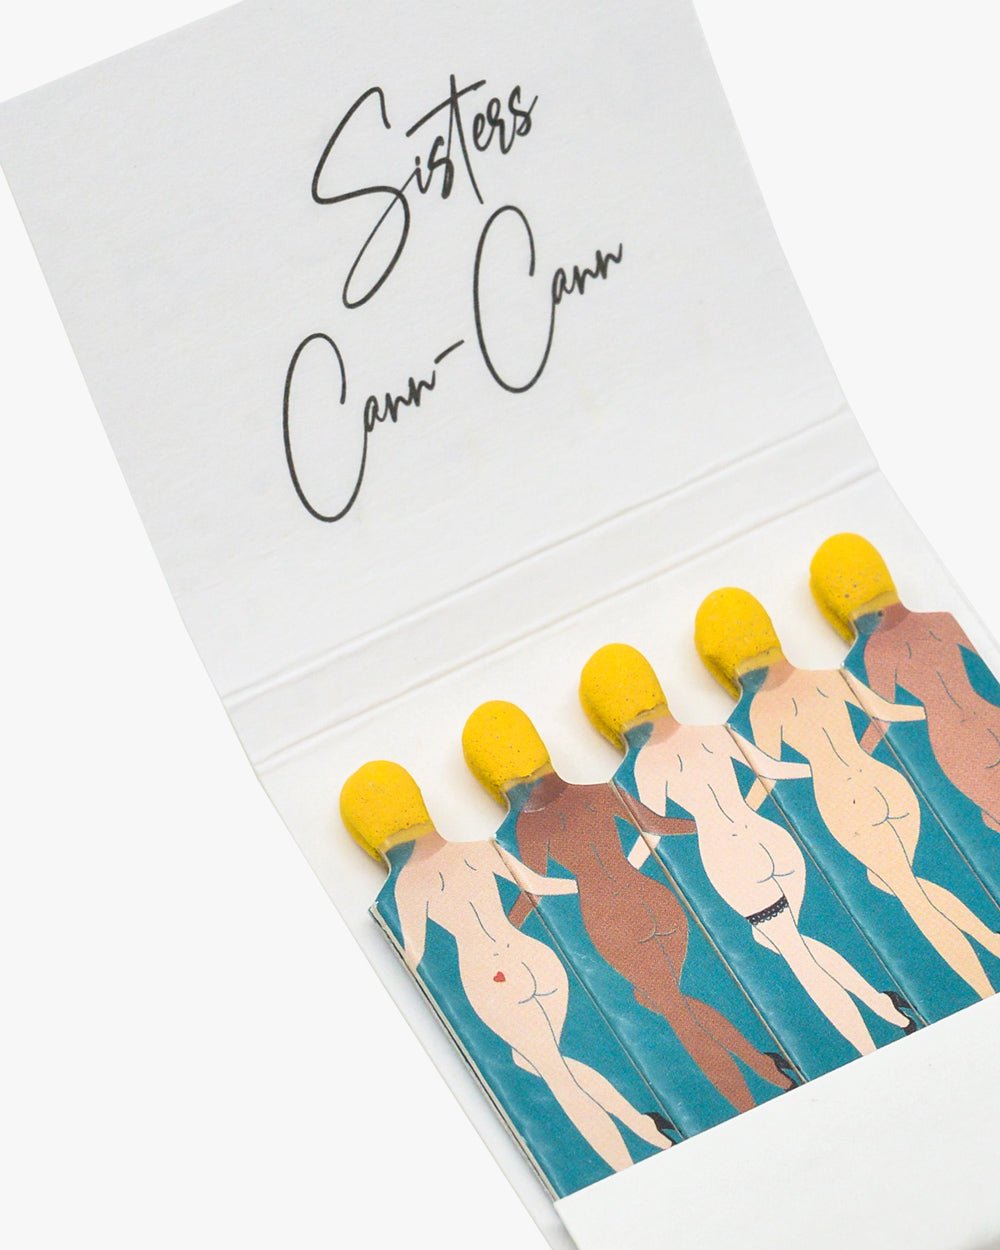 'SISTERS CANN-CANN' MATCHES (SET OF 3) - Shop Cupcakes and Cashmere